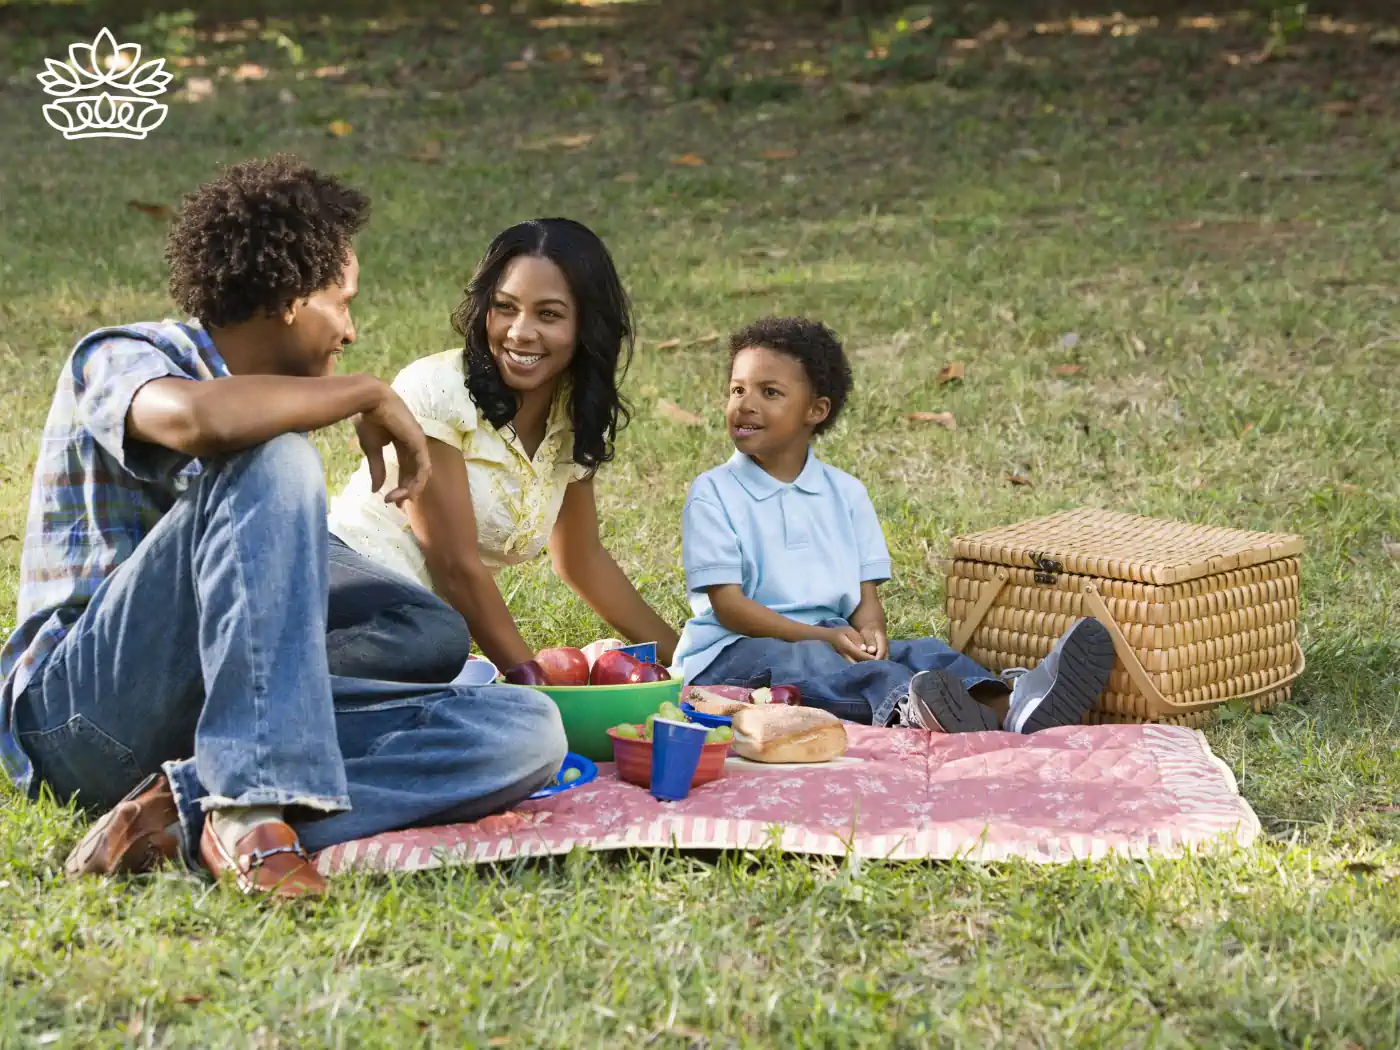 A family of three smiling and talking while enjoying a picnic with apples and sandwiches. Fabulous Flowers and Gifts - Picnic Gift Baskets Collection.